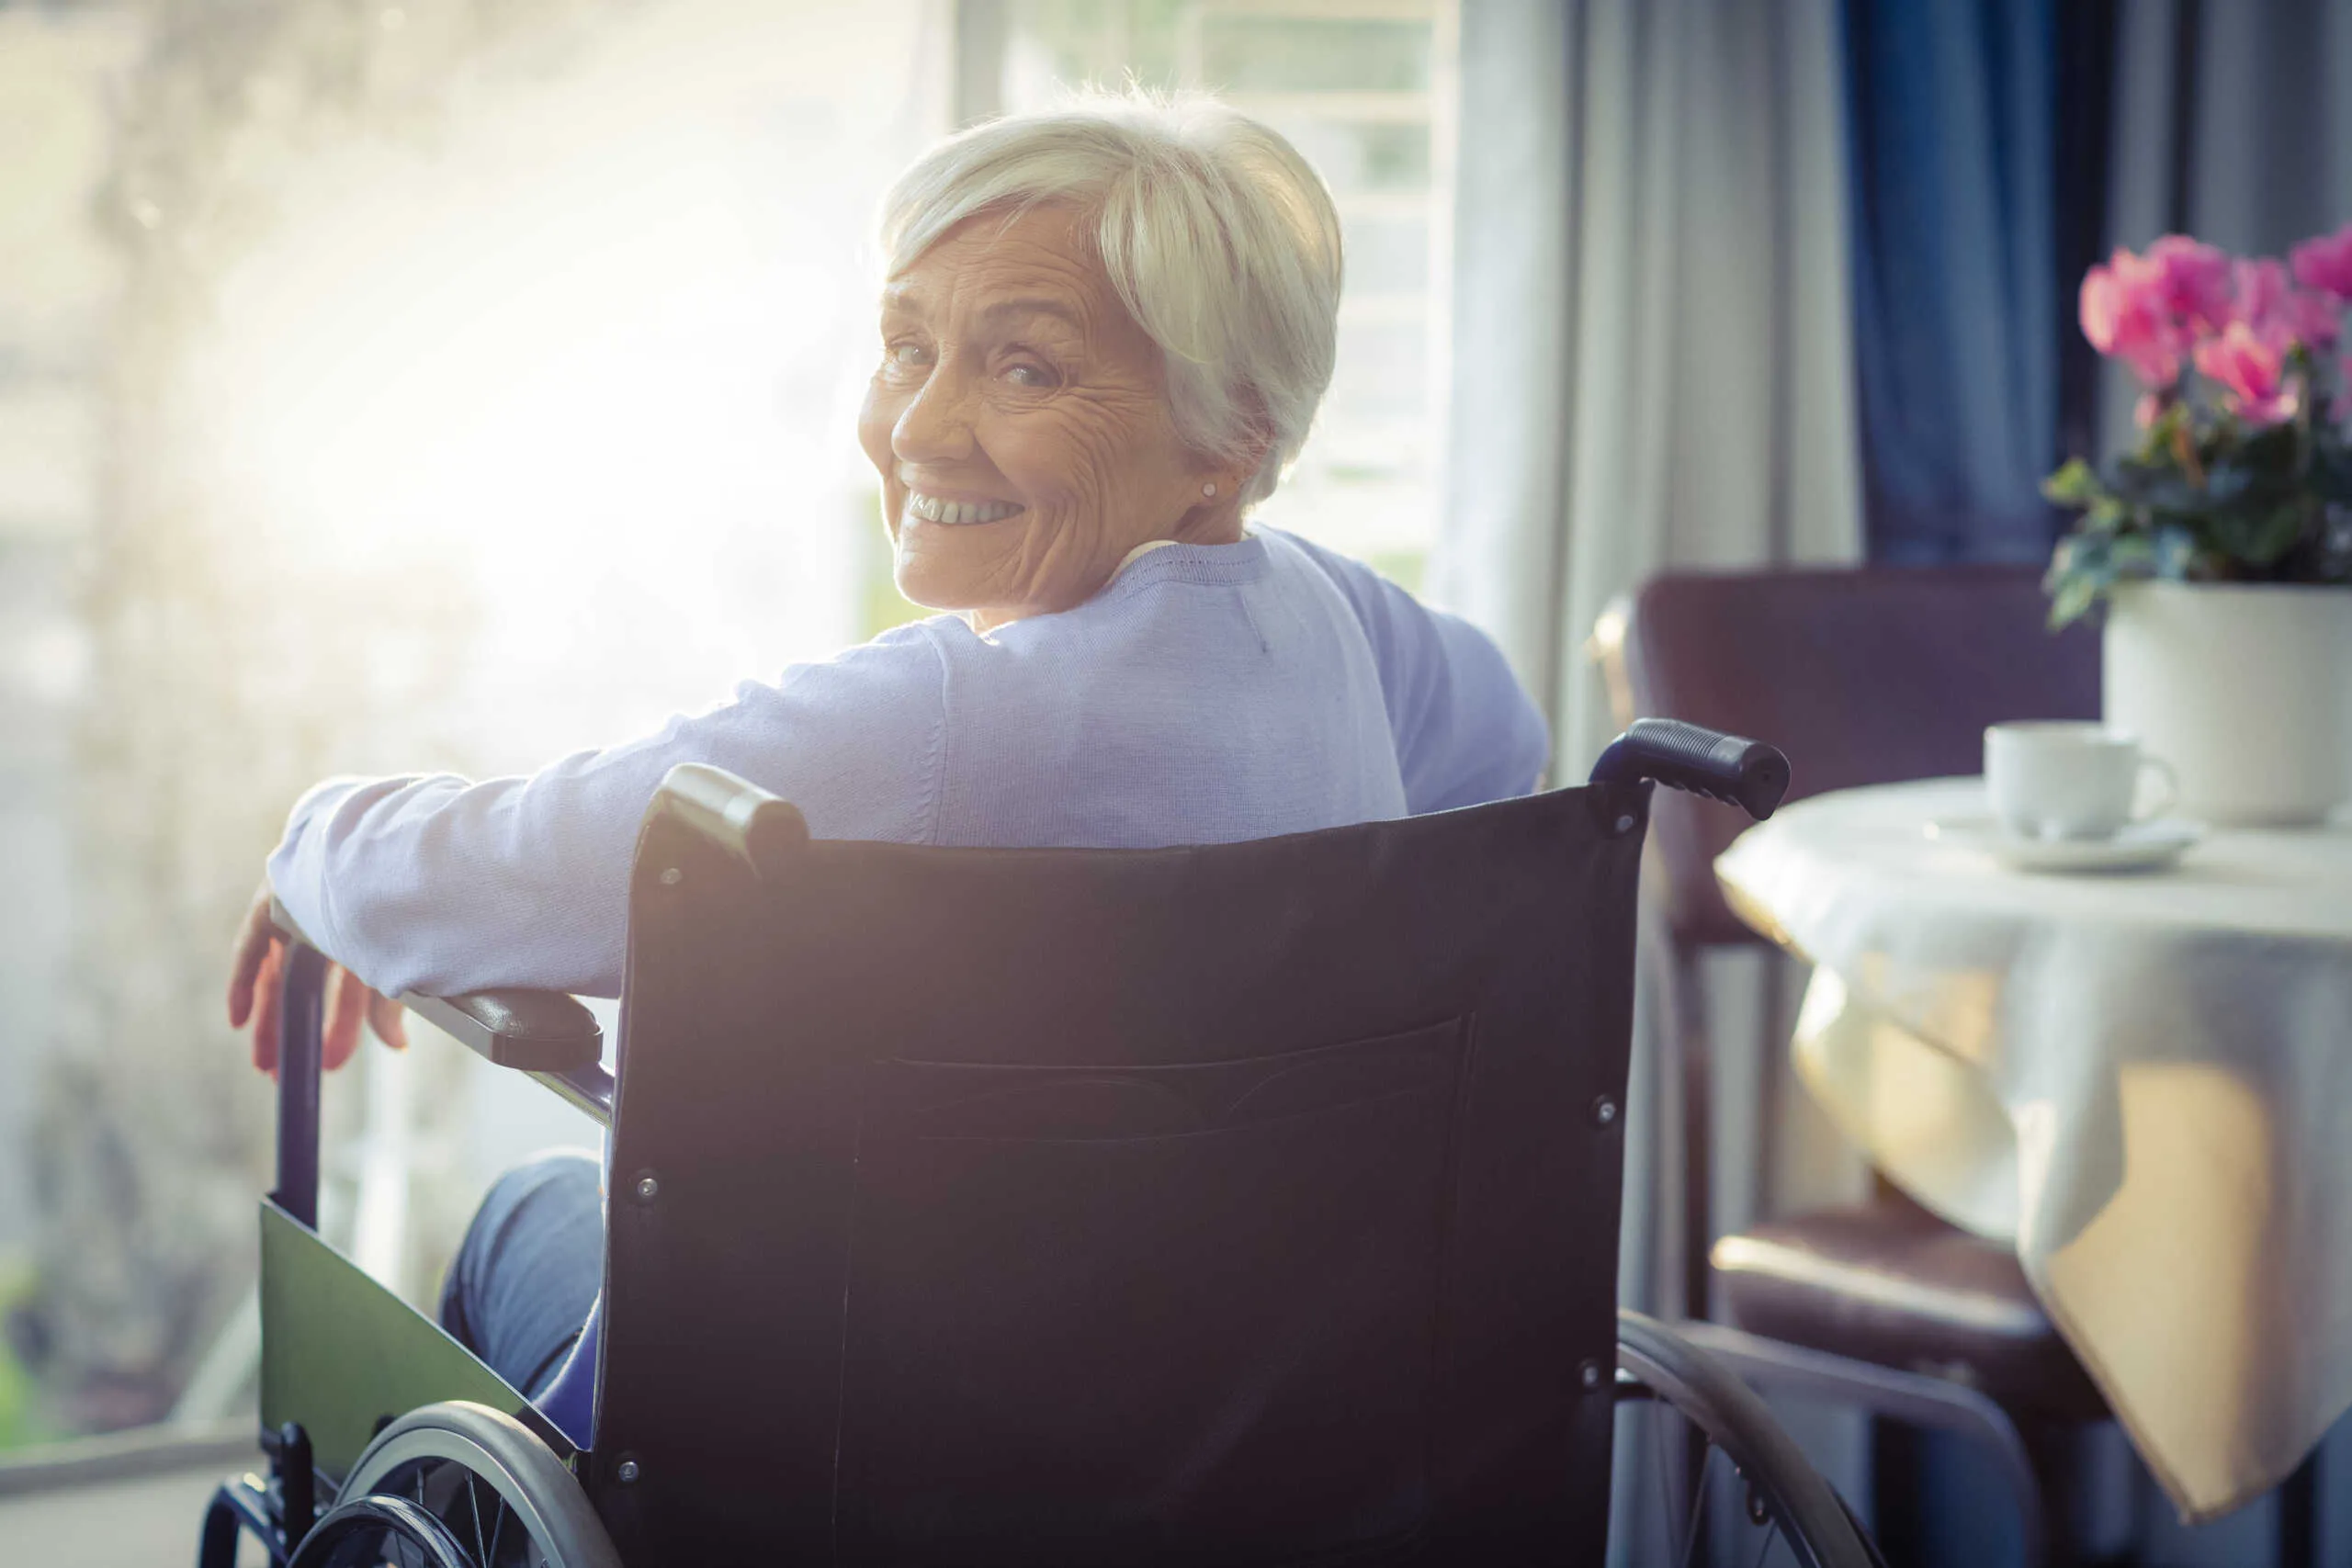 How to Find Affordable Senior Housing Alternatives